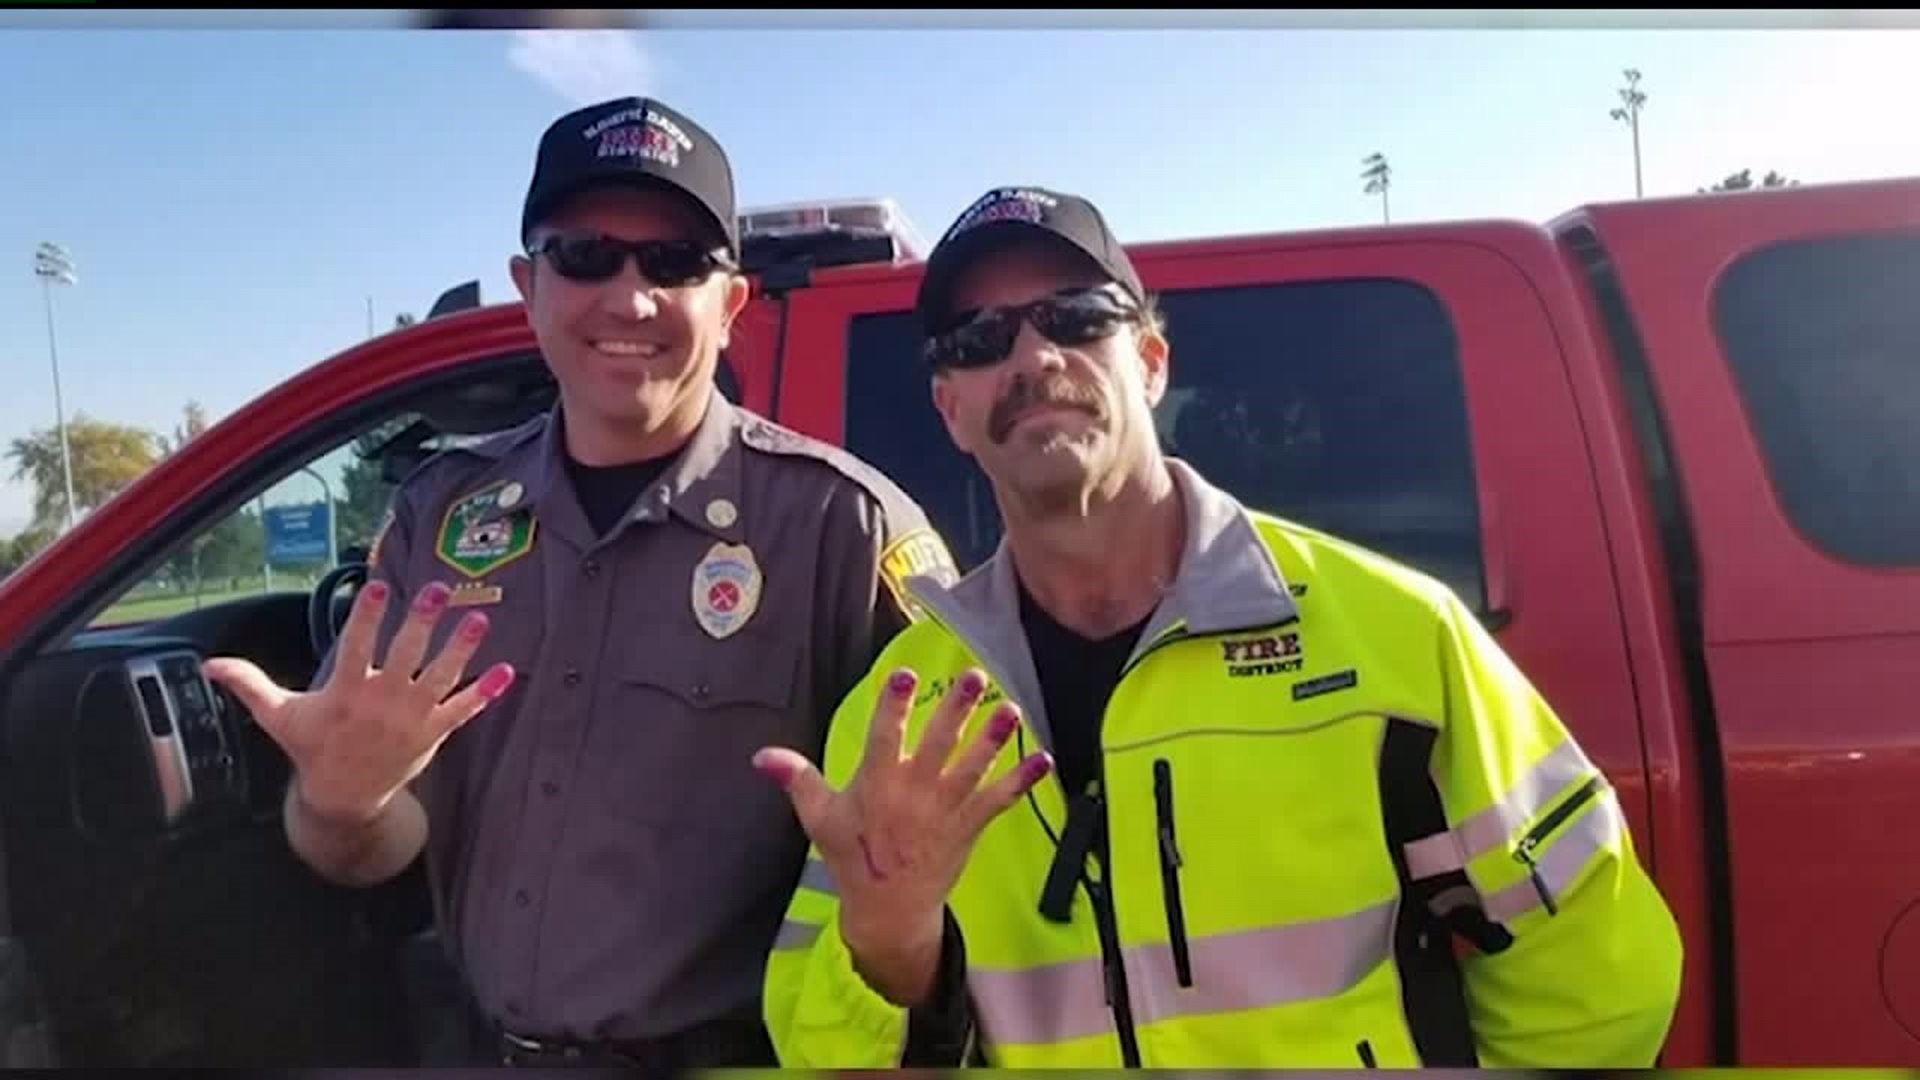 Why This Picture of Manicured Firefighters is Going Viral